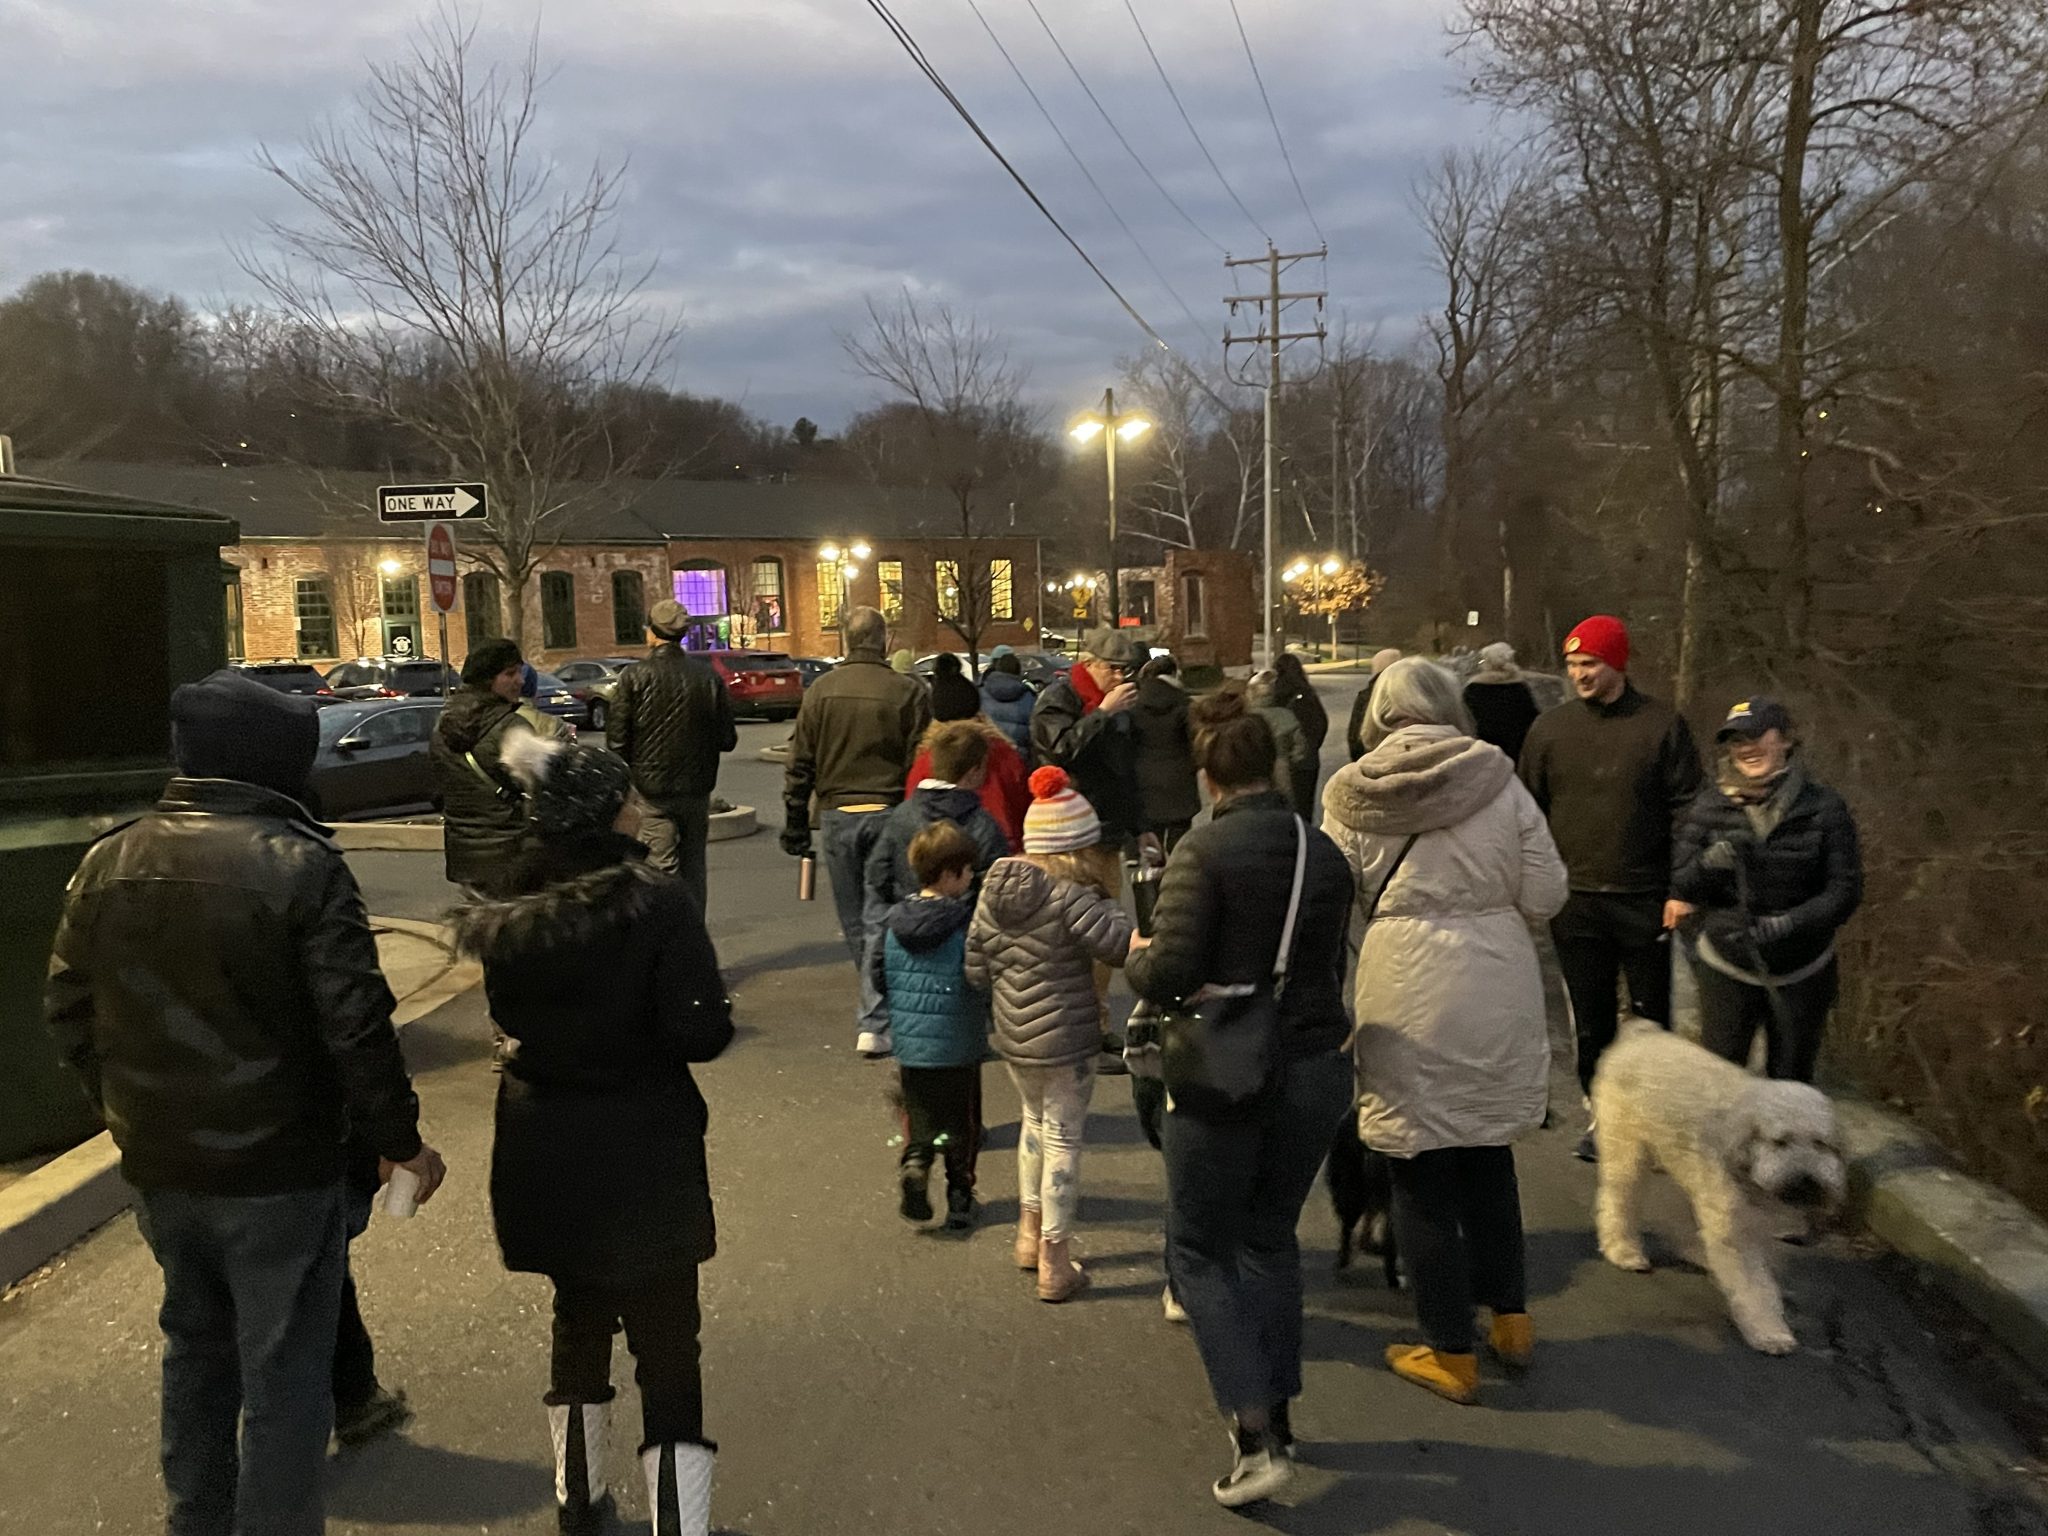 A group of people walk outside during the Winter Solstice event at the Karl Stirner Arts Trail.